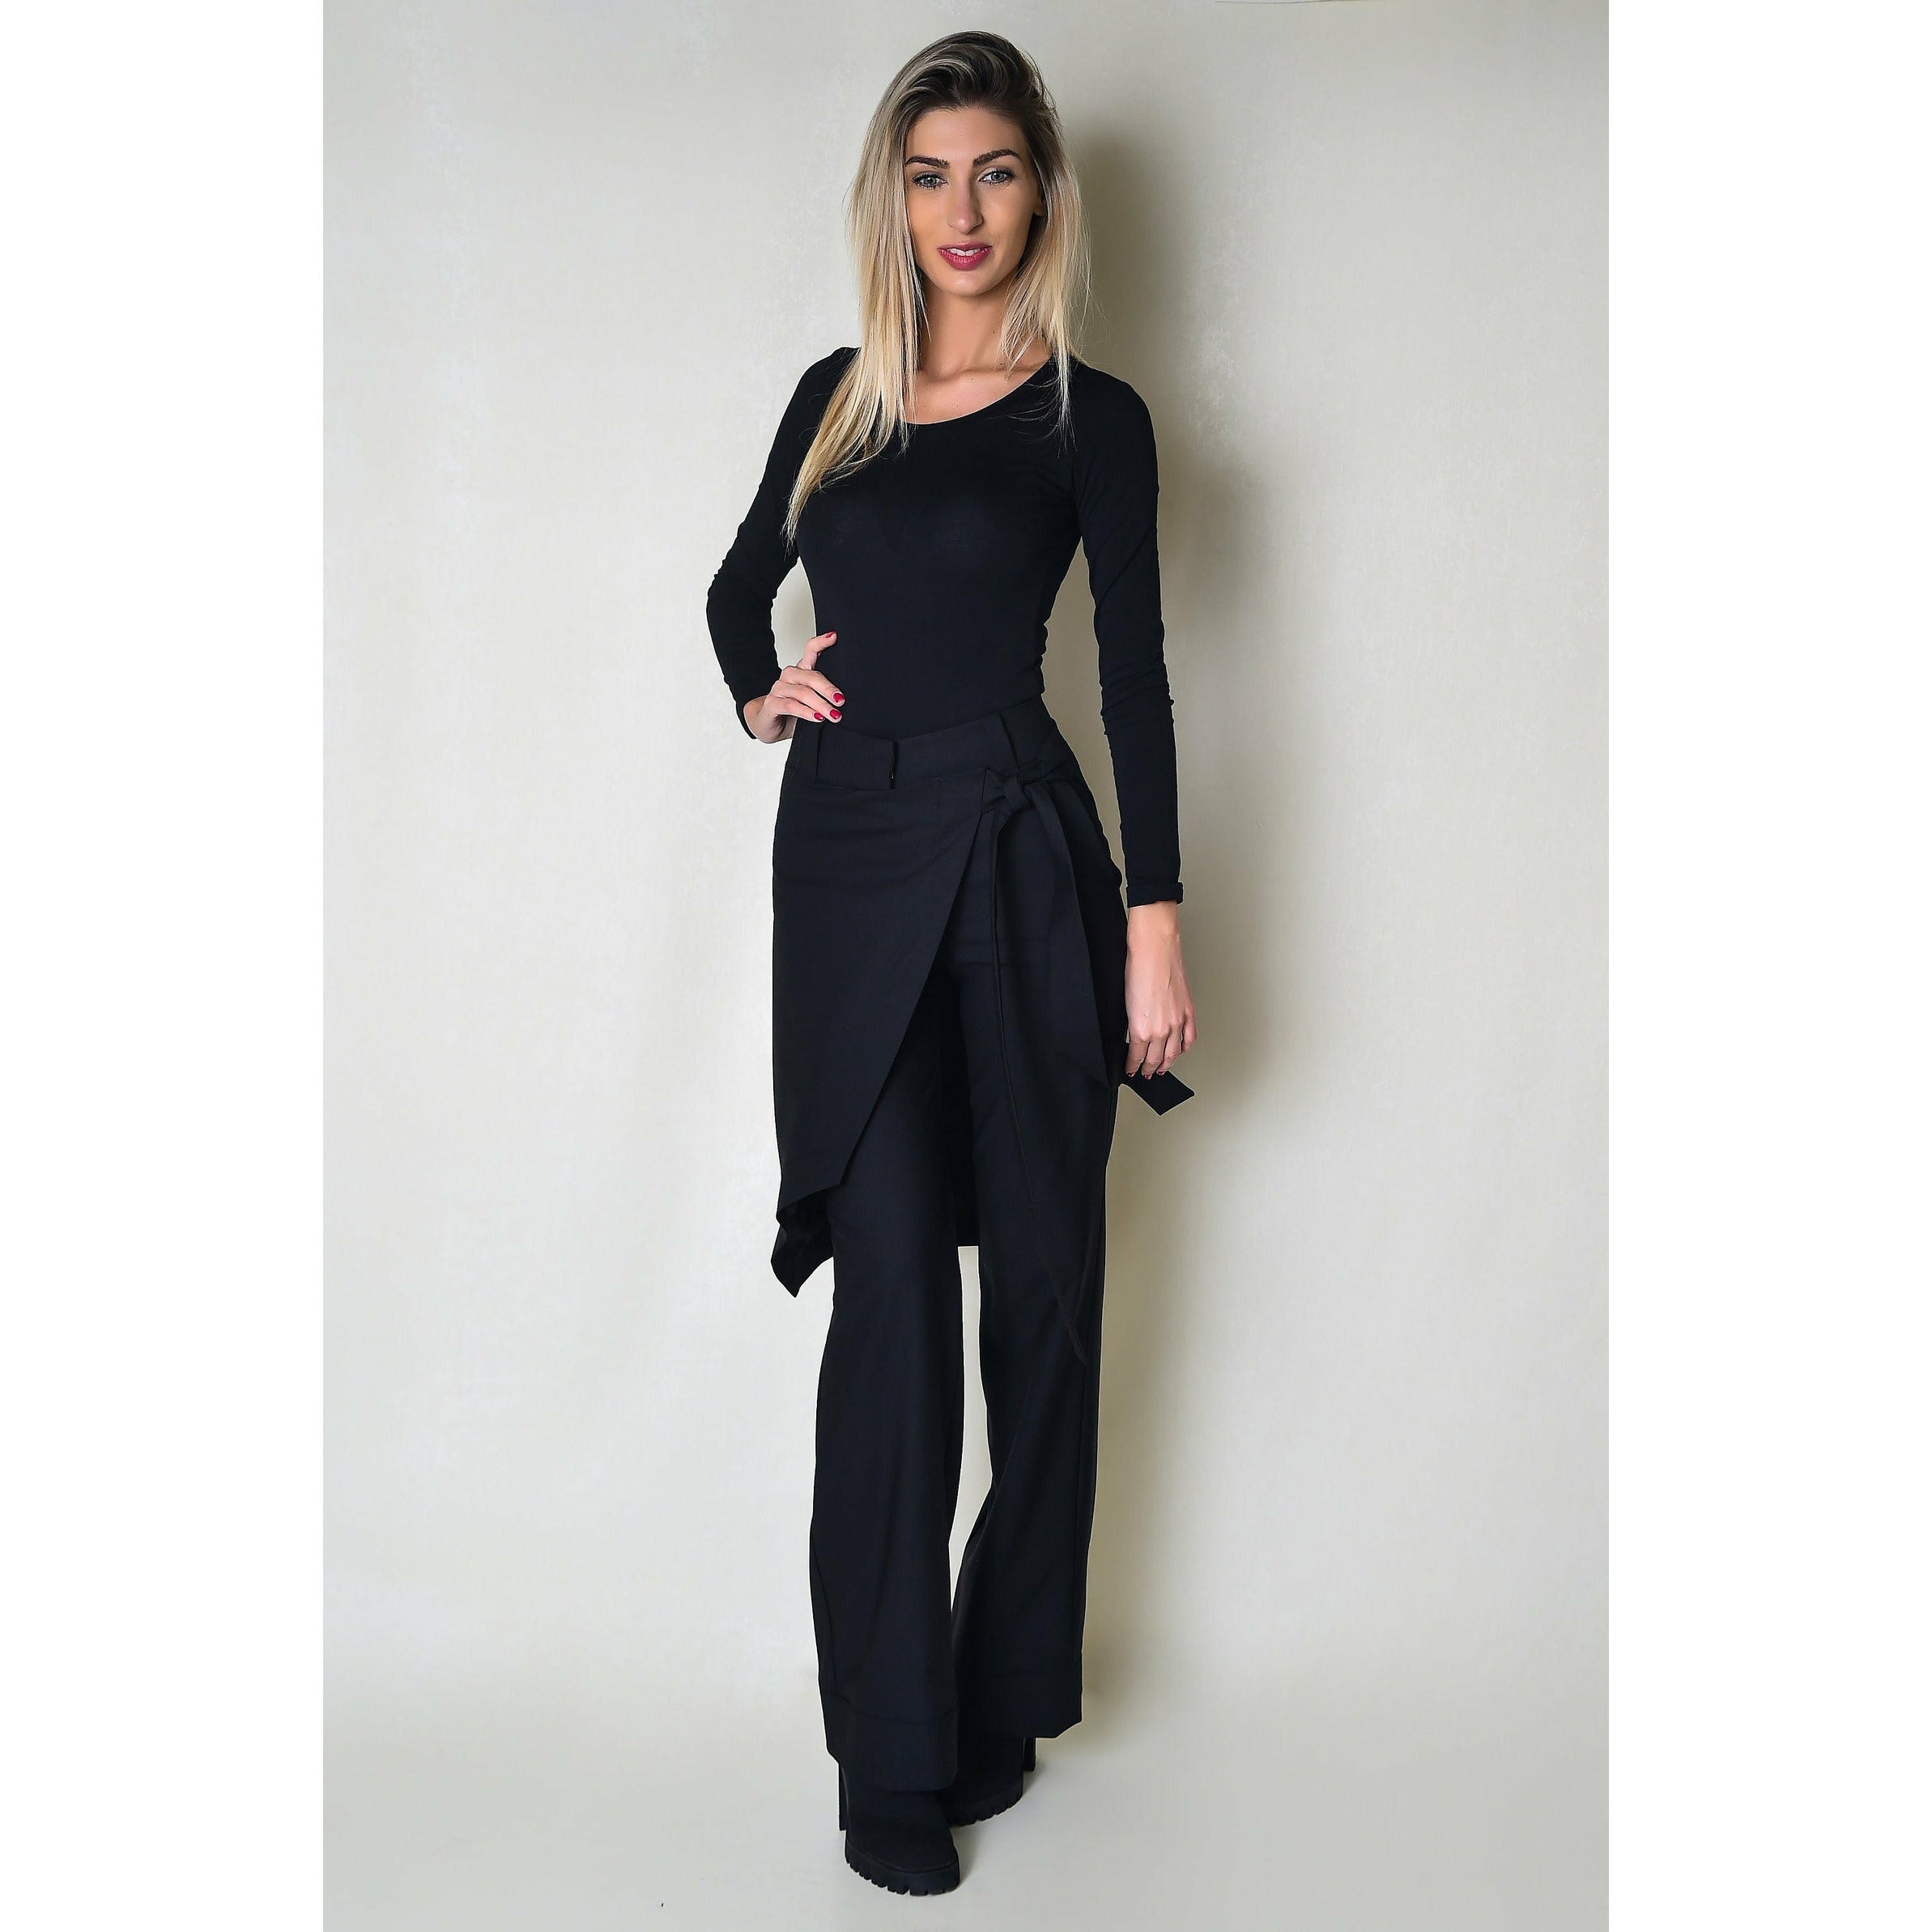 Women's High-Waisted and Cigarette Trousers | Marella